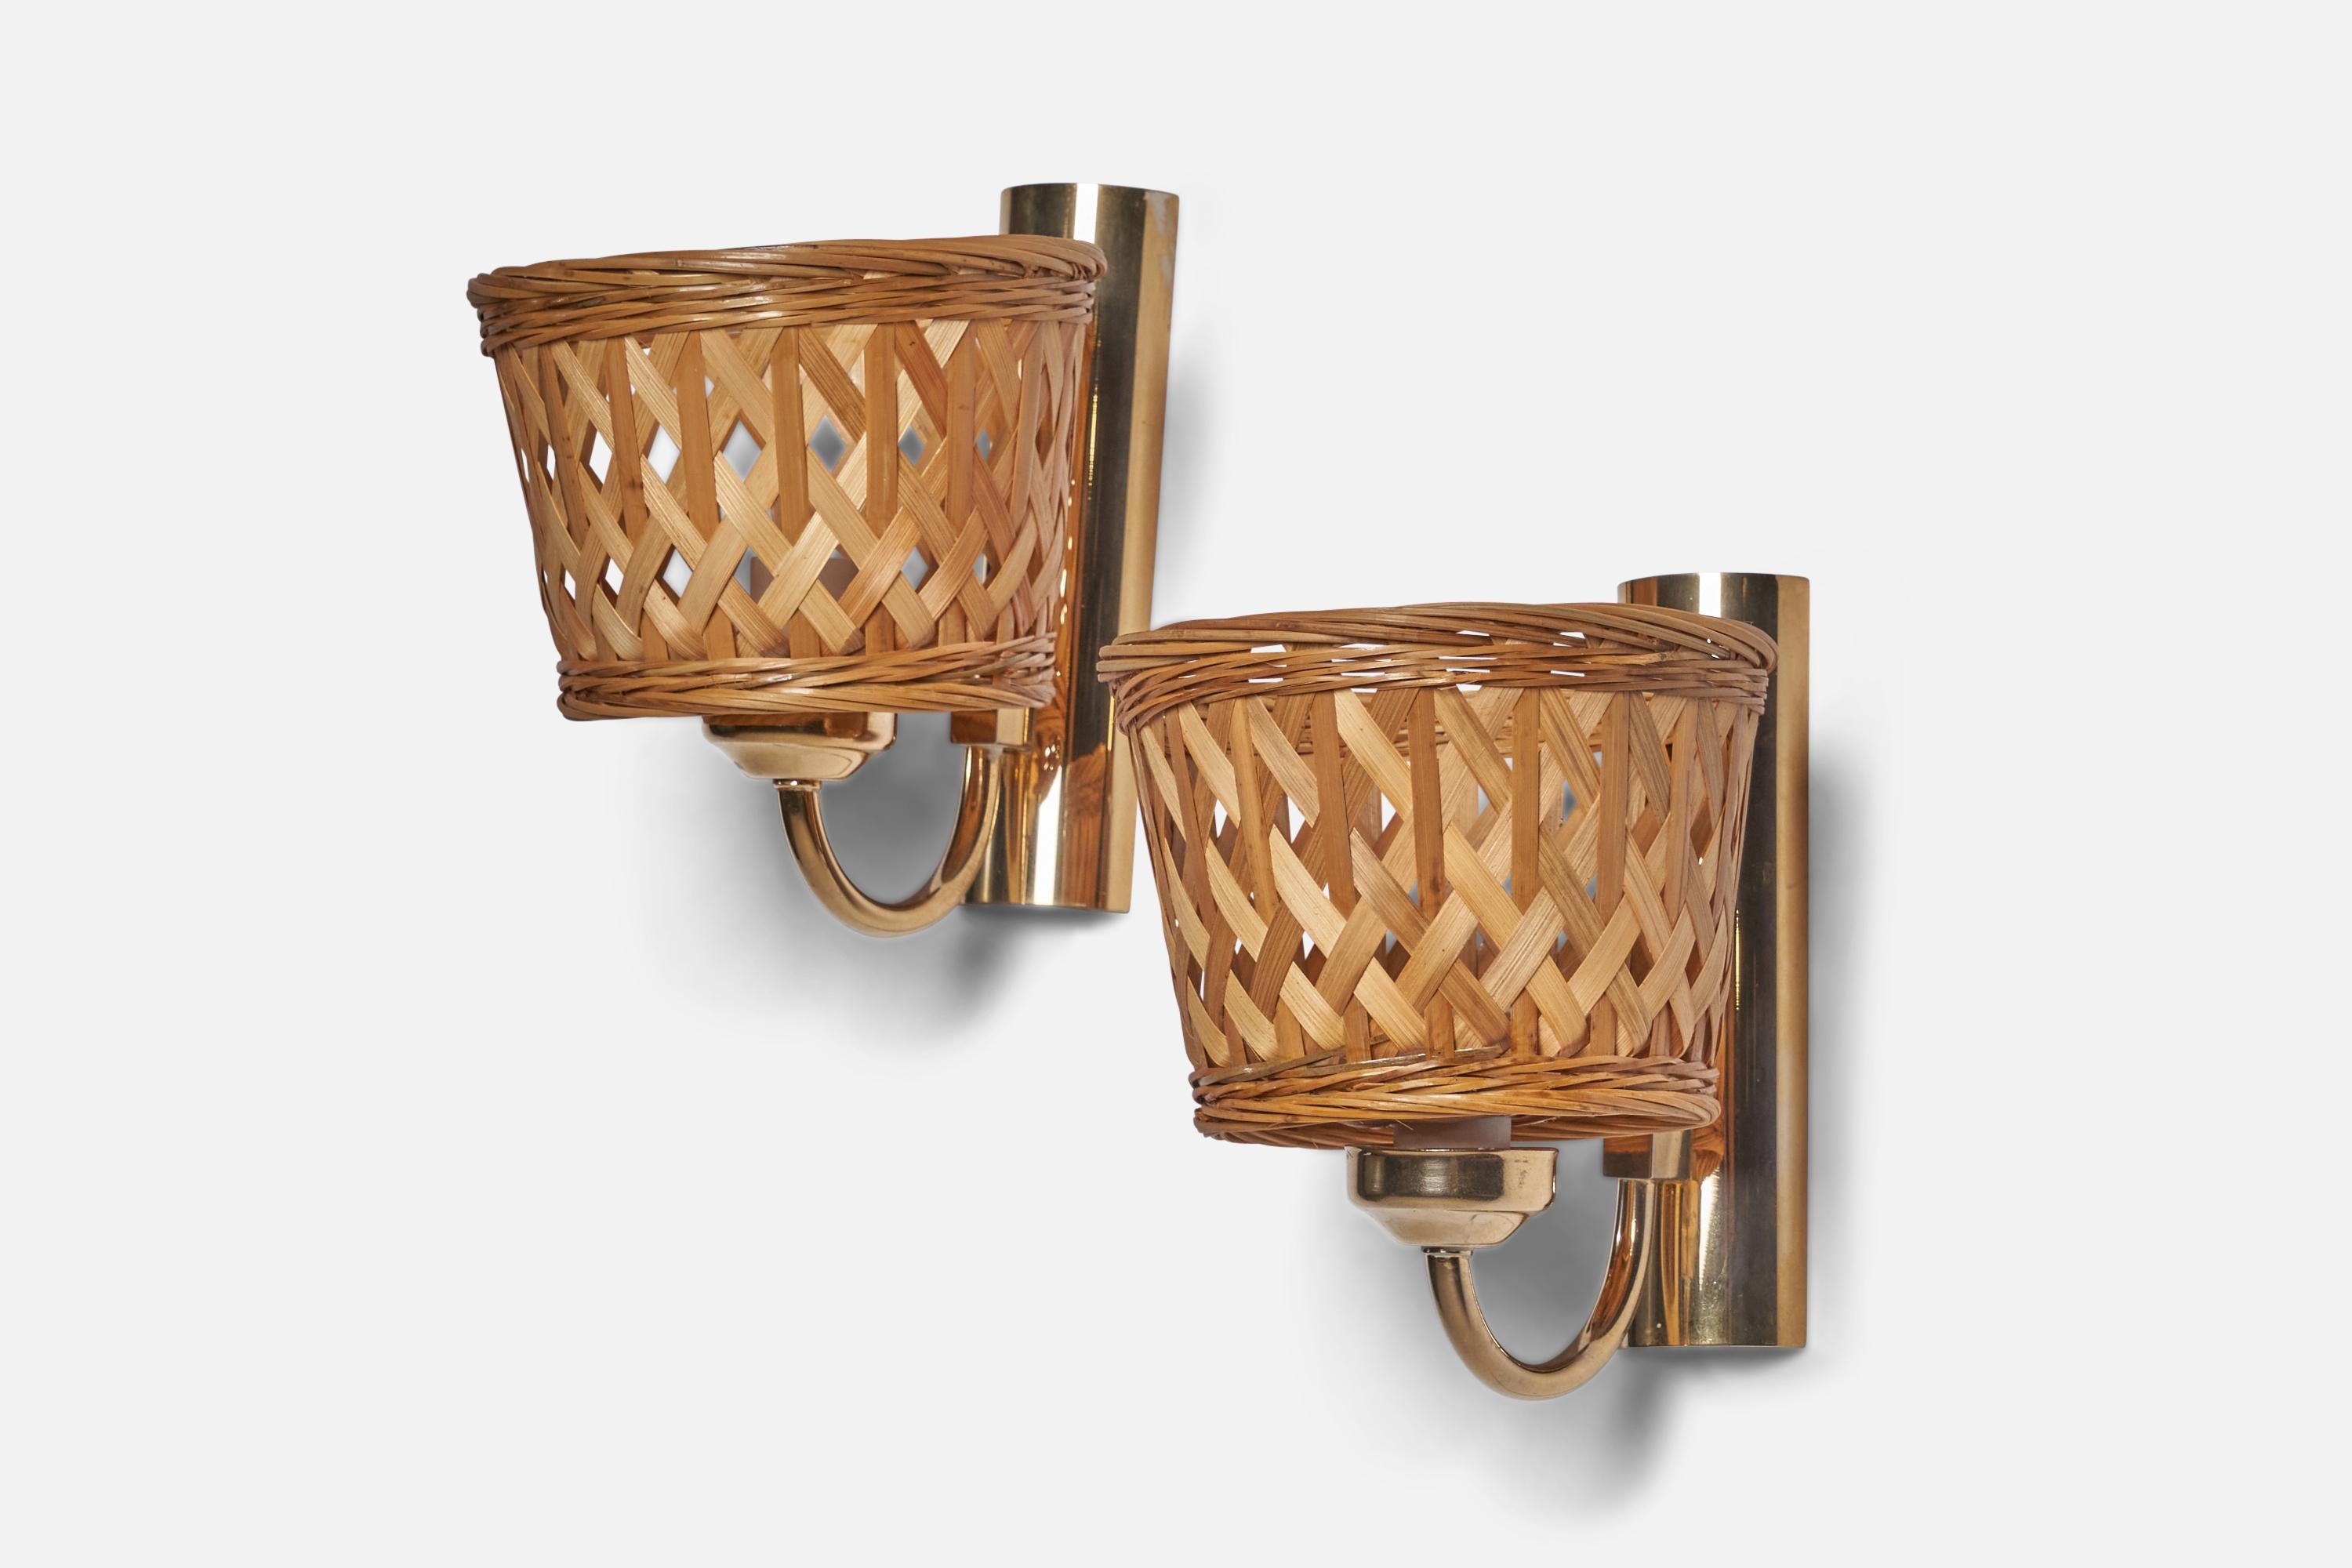 
A pair of brass and rattan wall lights designed and produced in Sweden, 1970s.
Overall Dimensions (inches): 7.5” H x 6.25” W x 7.5” D
Back Plate Dimensions (inches): 7.25” H x 2” W x 0.8” D
Bulb Specifications: E-14 Bulb
Number of Sockets: 1
All